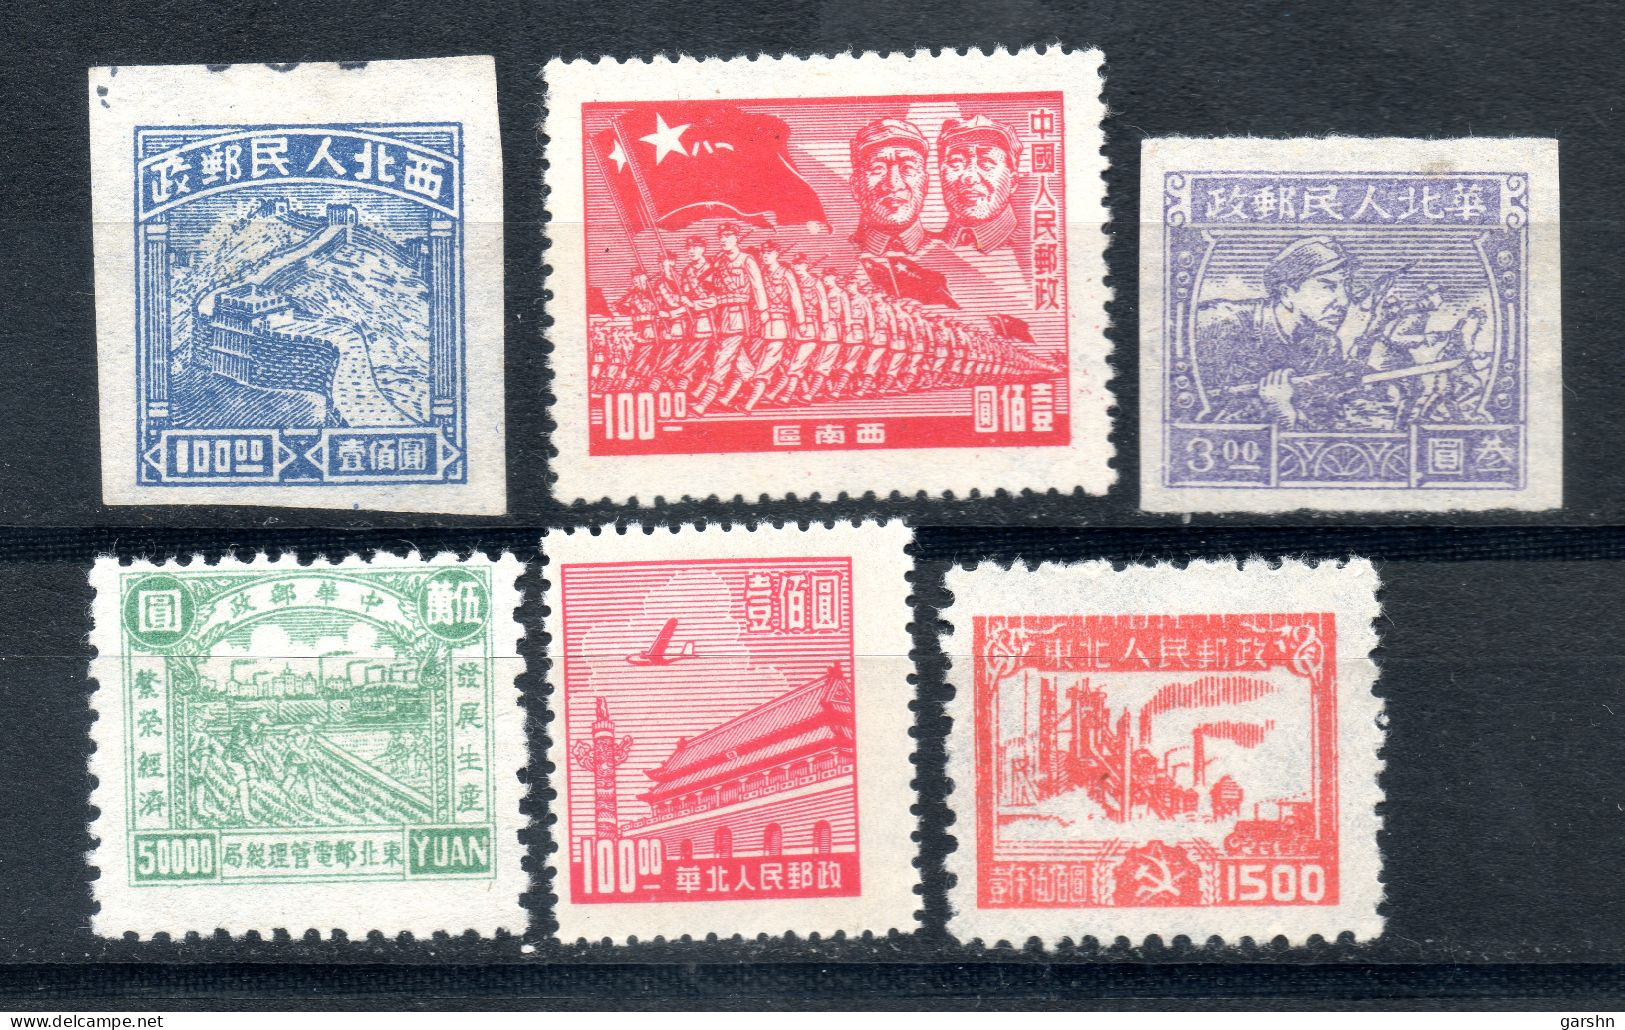 China Chine : (5010) Lot De Timbres De Chine Communiste - Northern China 1949-50